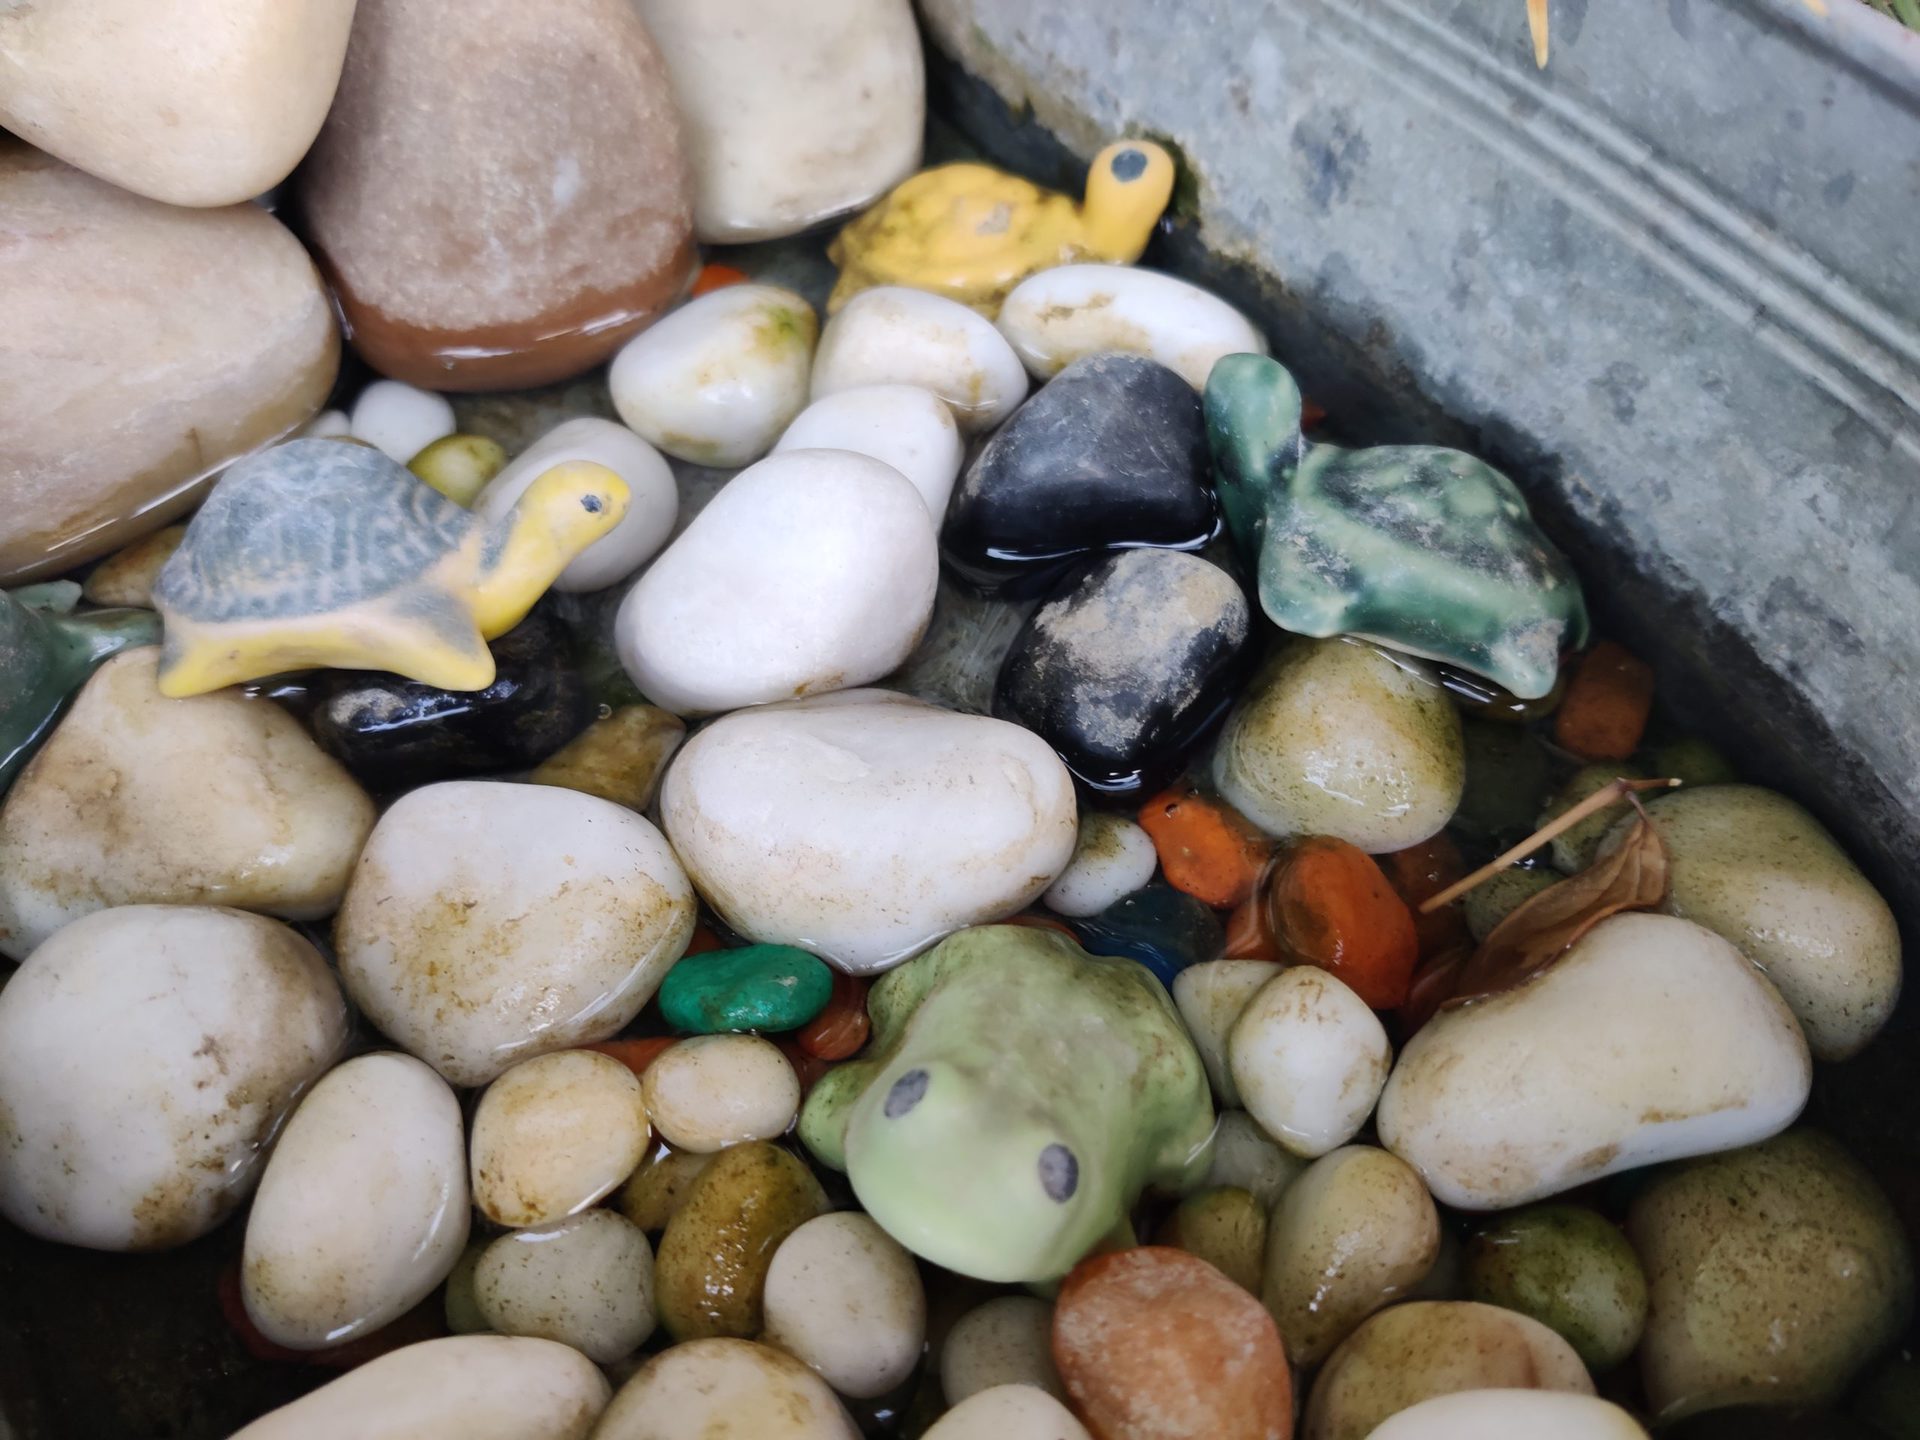 OnePlus Nord primary sensor shot of some different colored pebbles and stones.